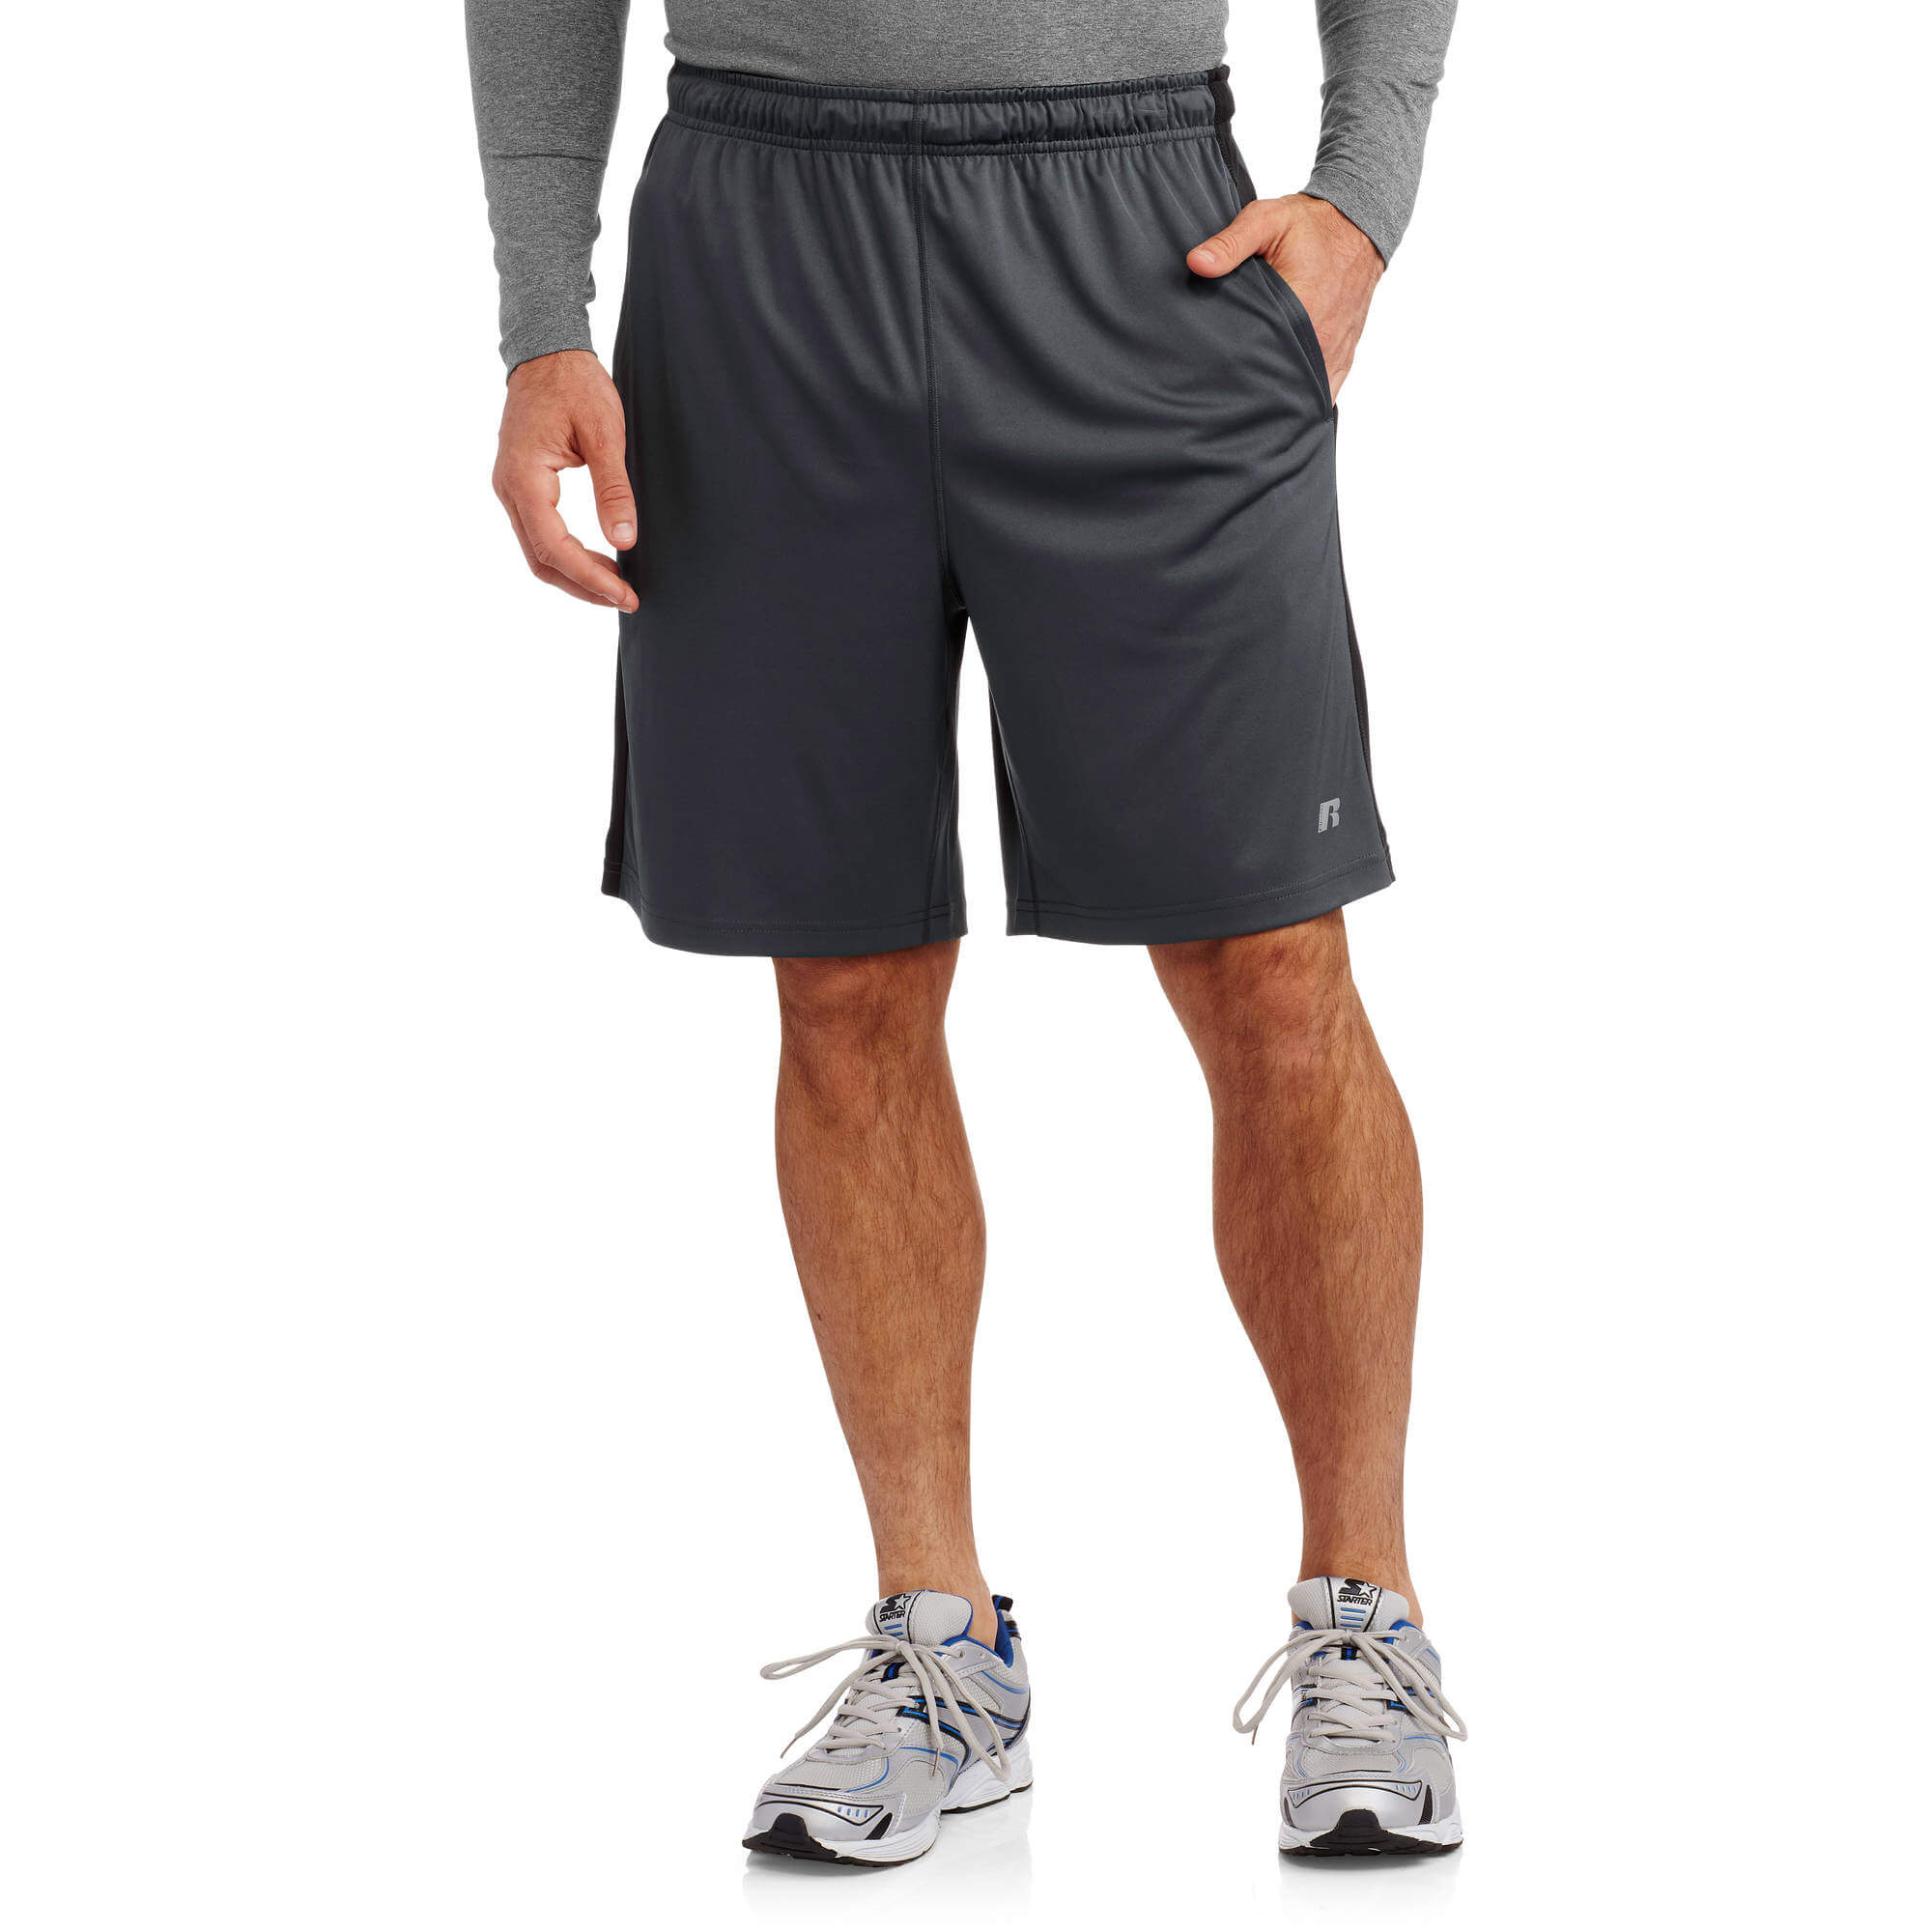 Grey Sports Sneakers With Grey Shorts